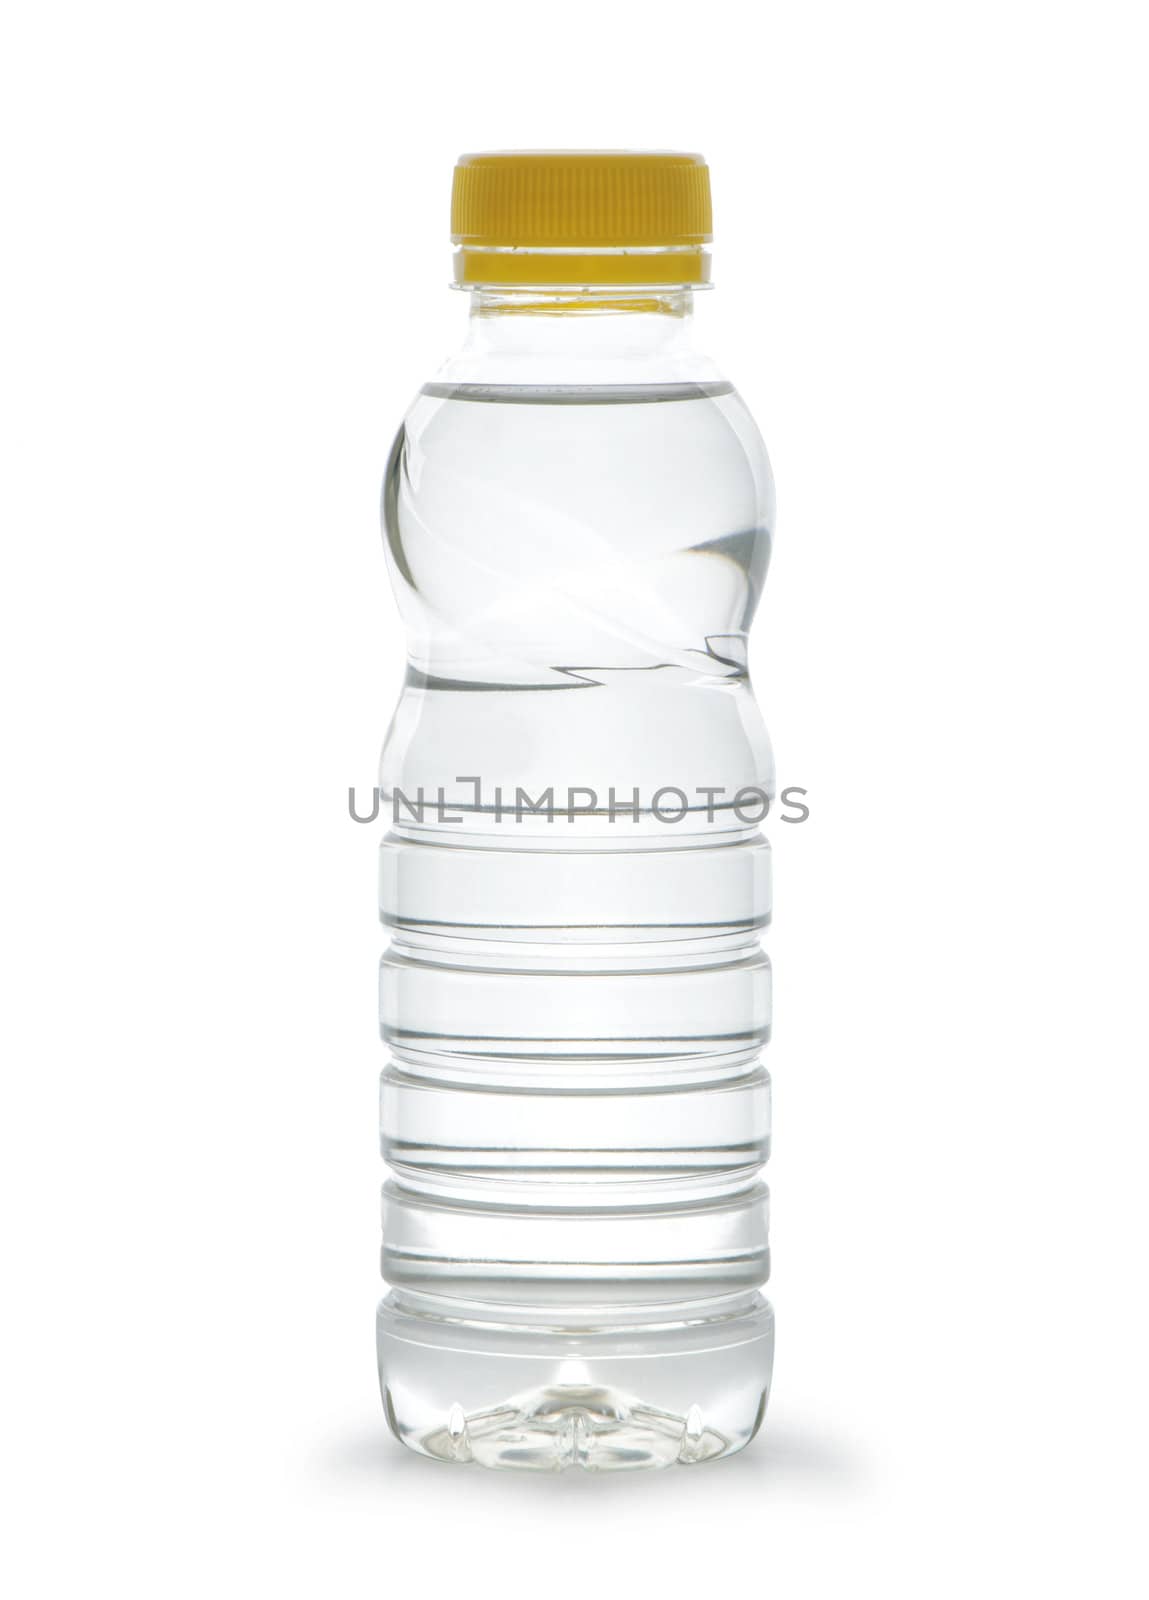 Bottle with water. It is isolated on a white background